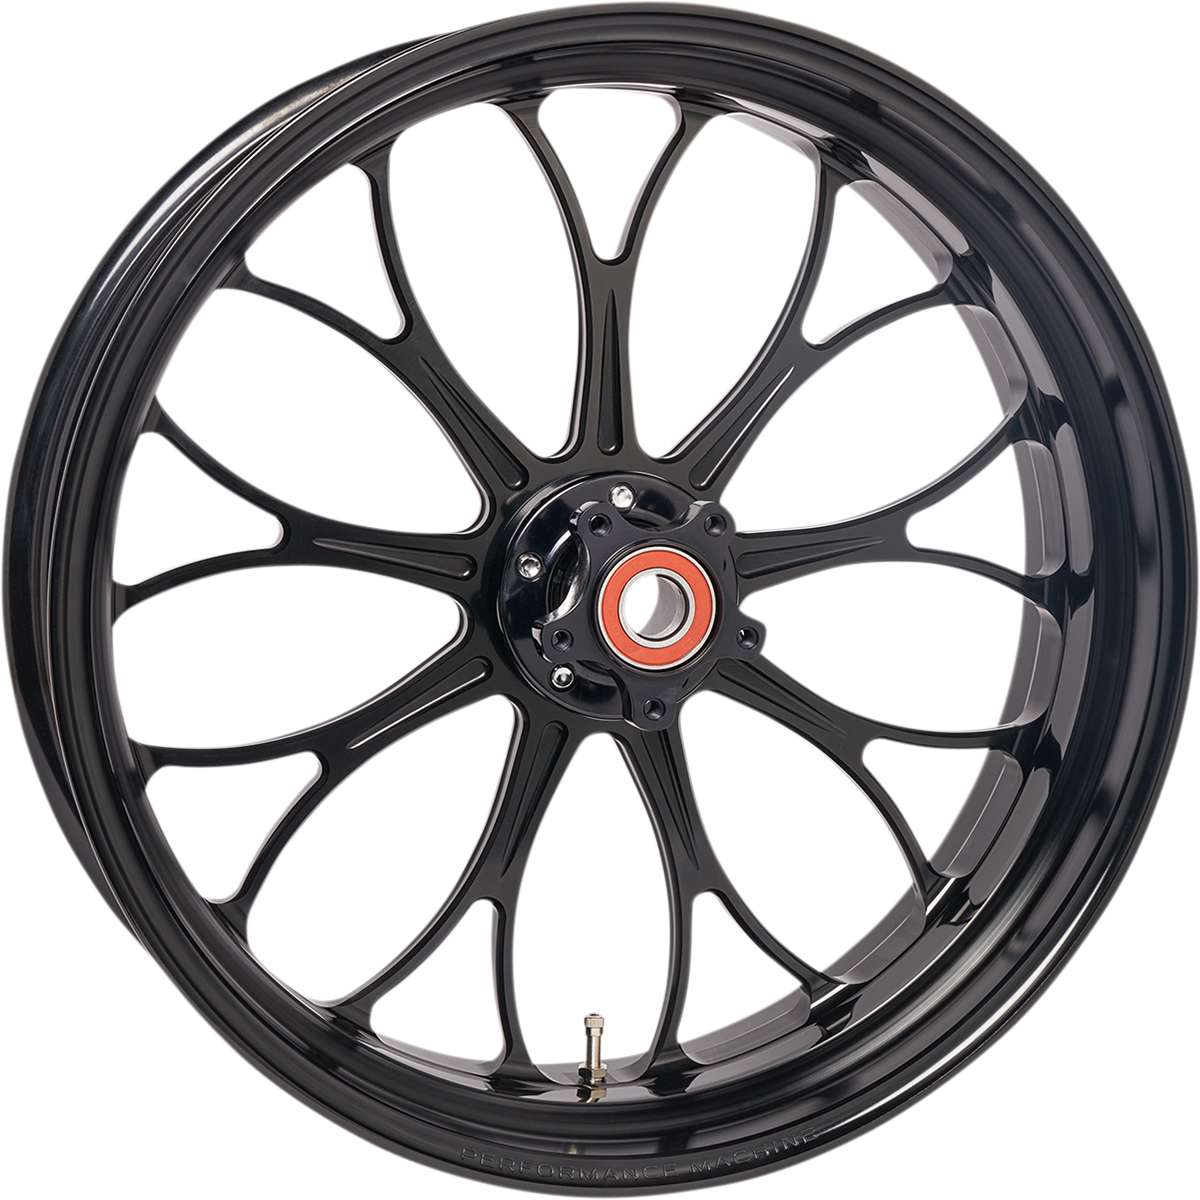 Wheel - Revolution - Single Disc - Rear - Black Ops™ - 18"x5.50" - Without ABS